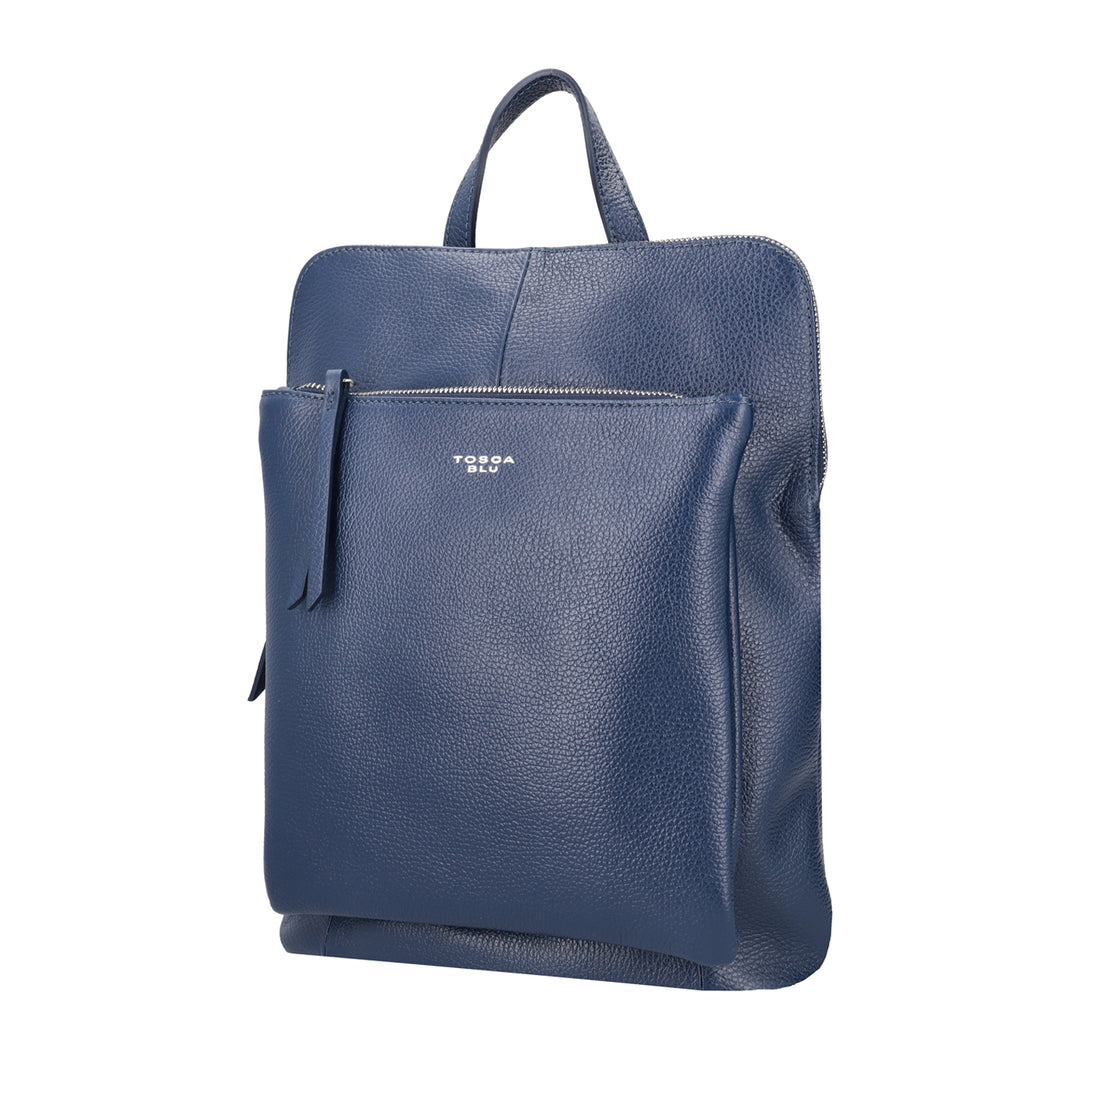 BLUE LEATHER BACKPACK WITH ZIPPER CLOSURE